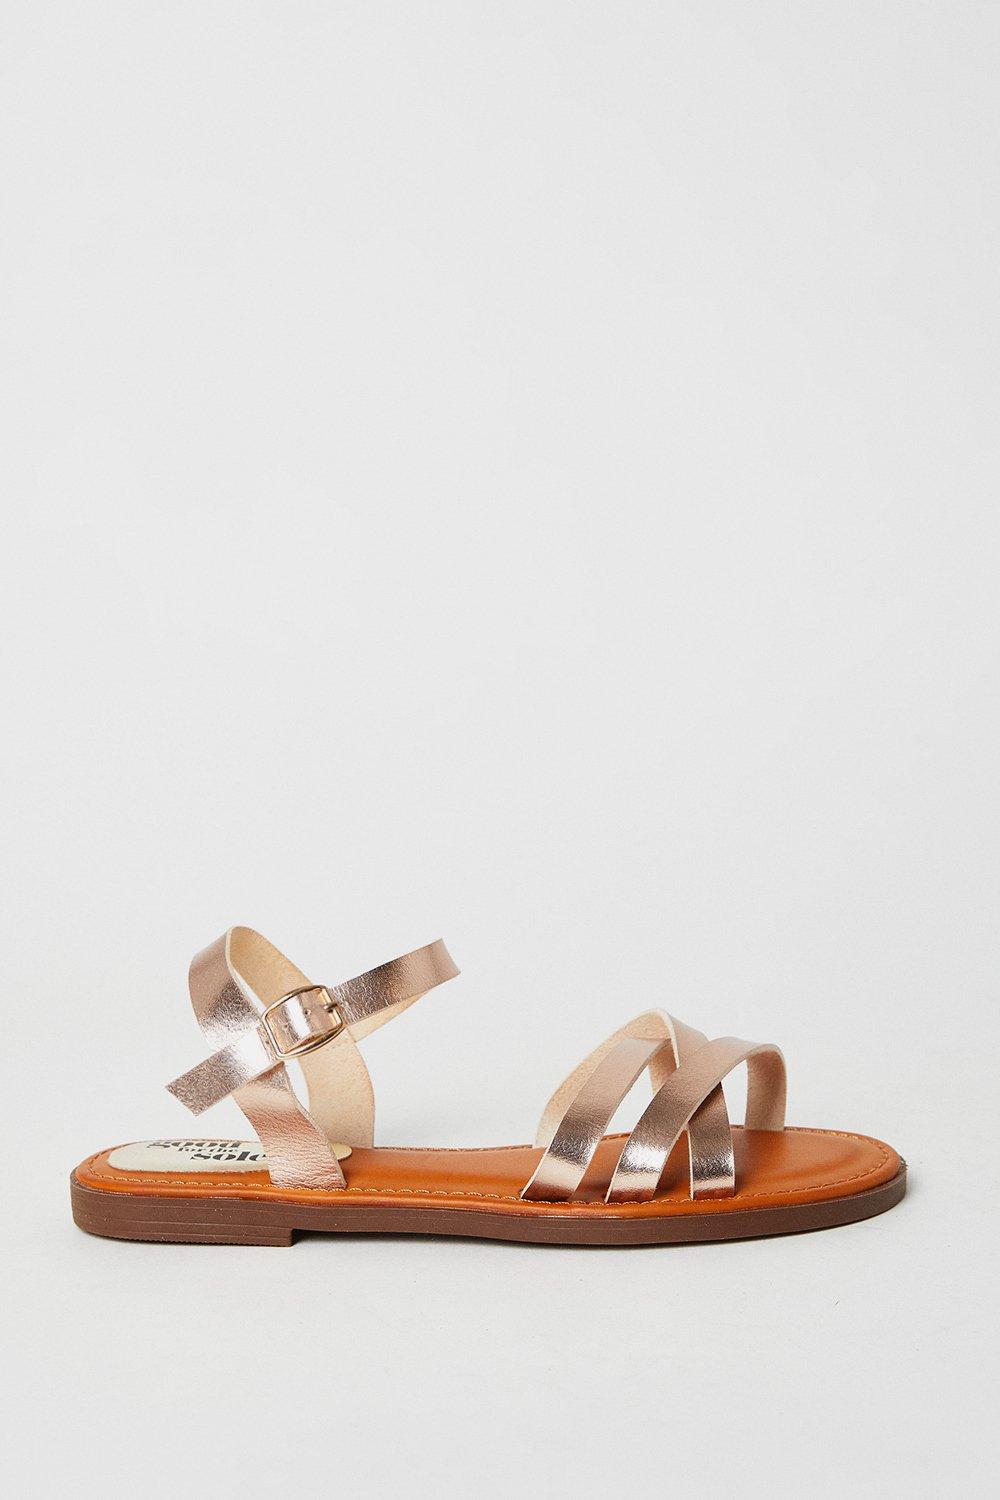 Womens Good For The Sole: Melanie Comfort Cross Strap Flat Sandals